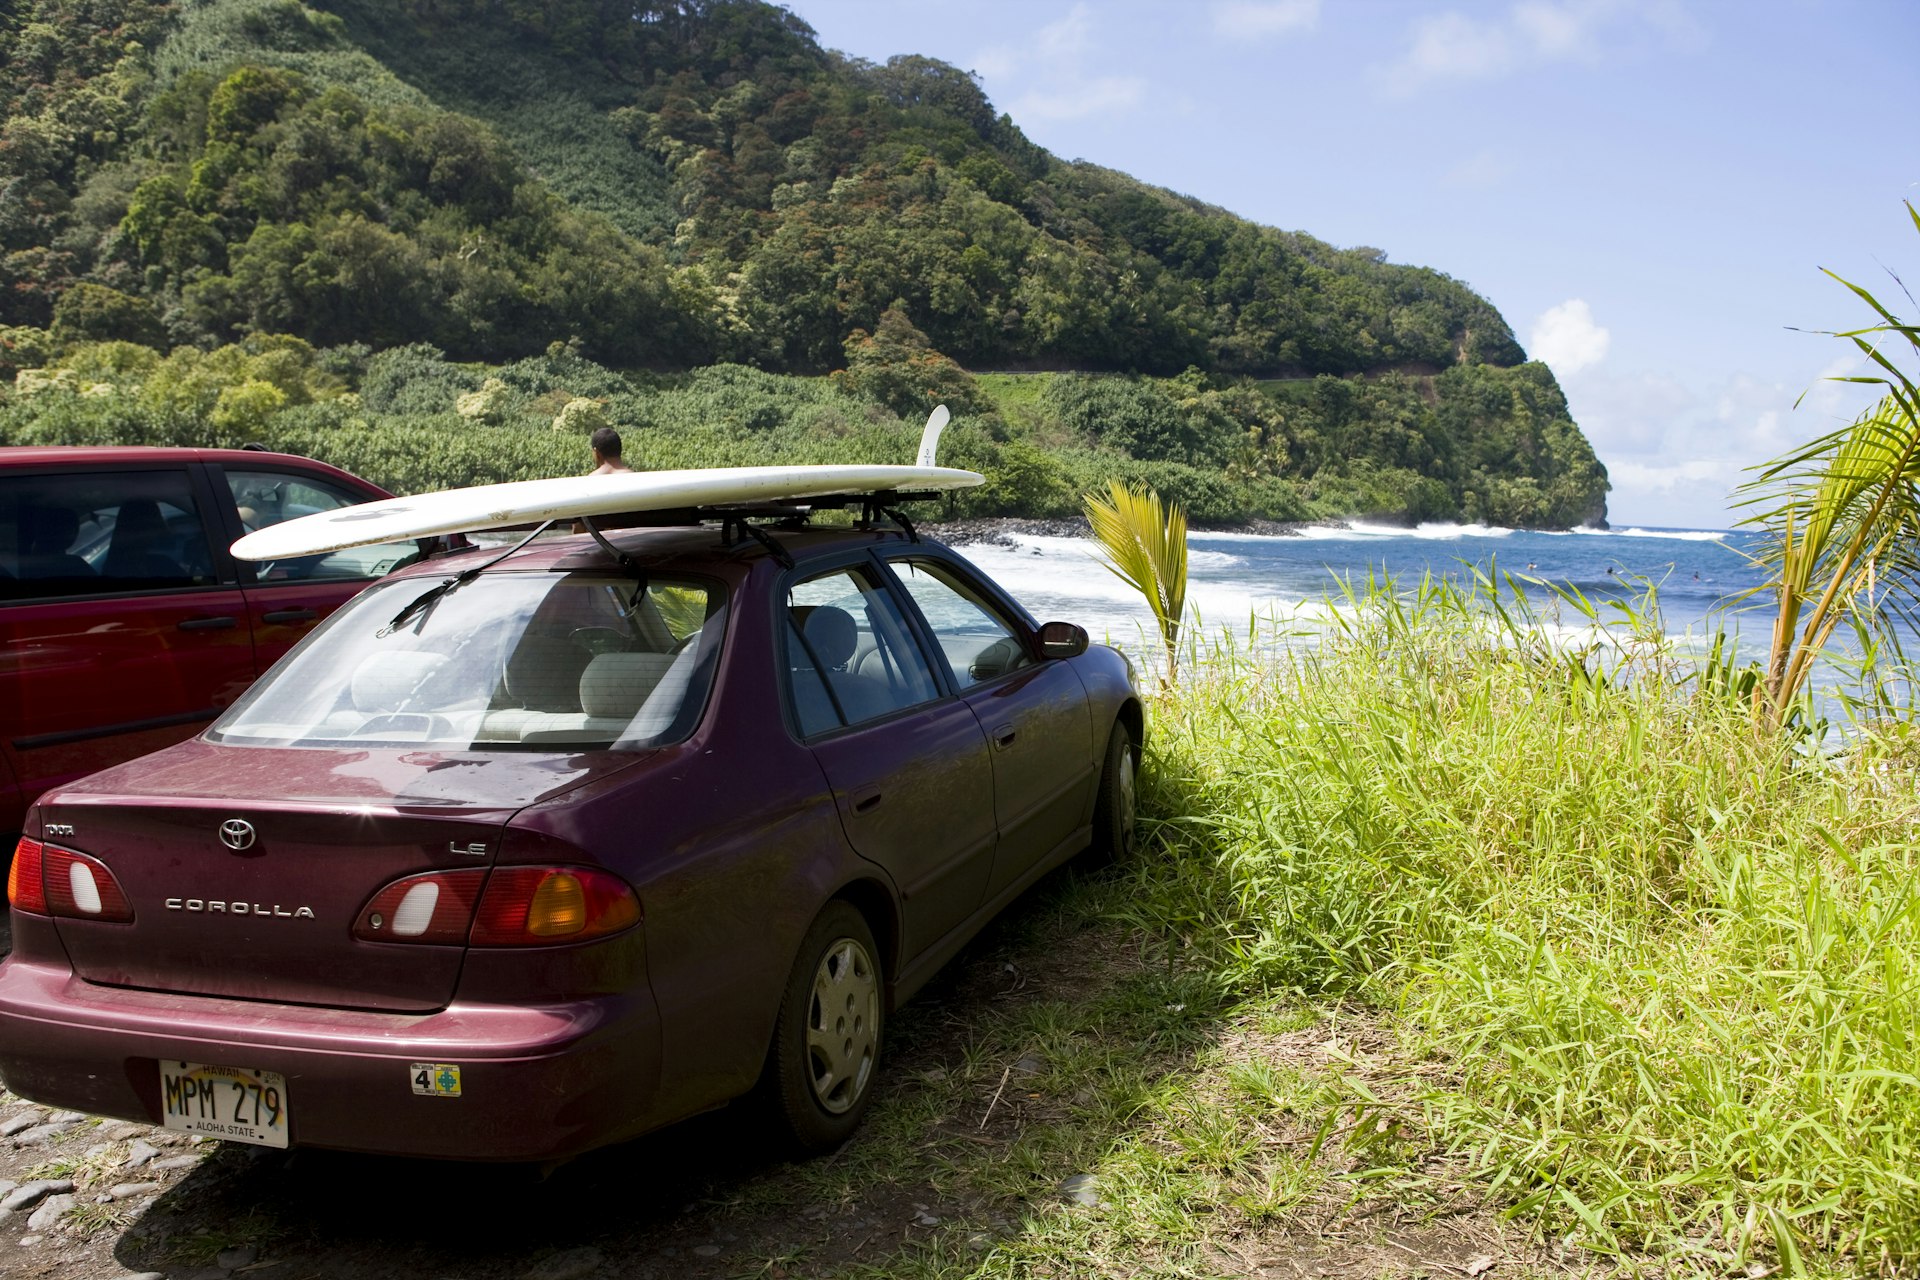 A red car parked at a beach with a surfboard on its roof